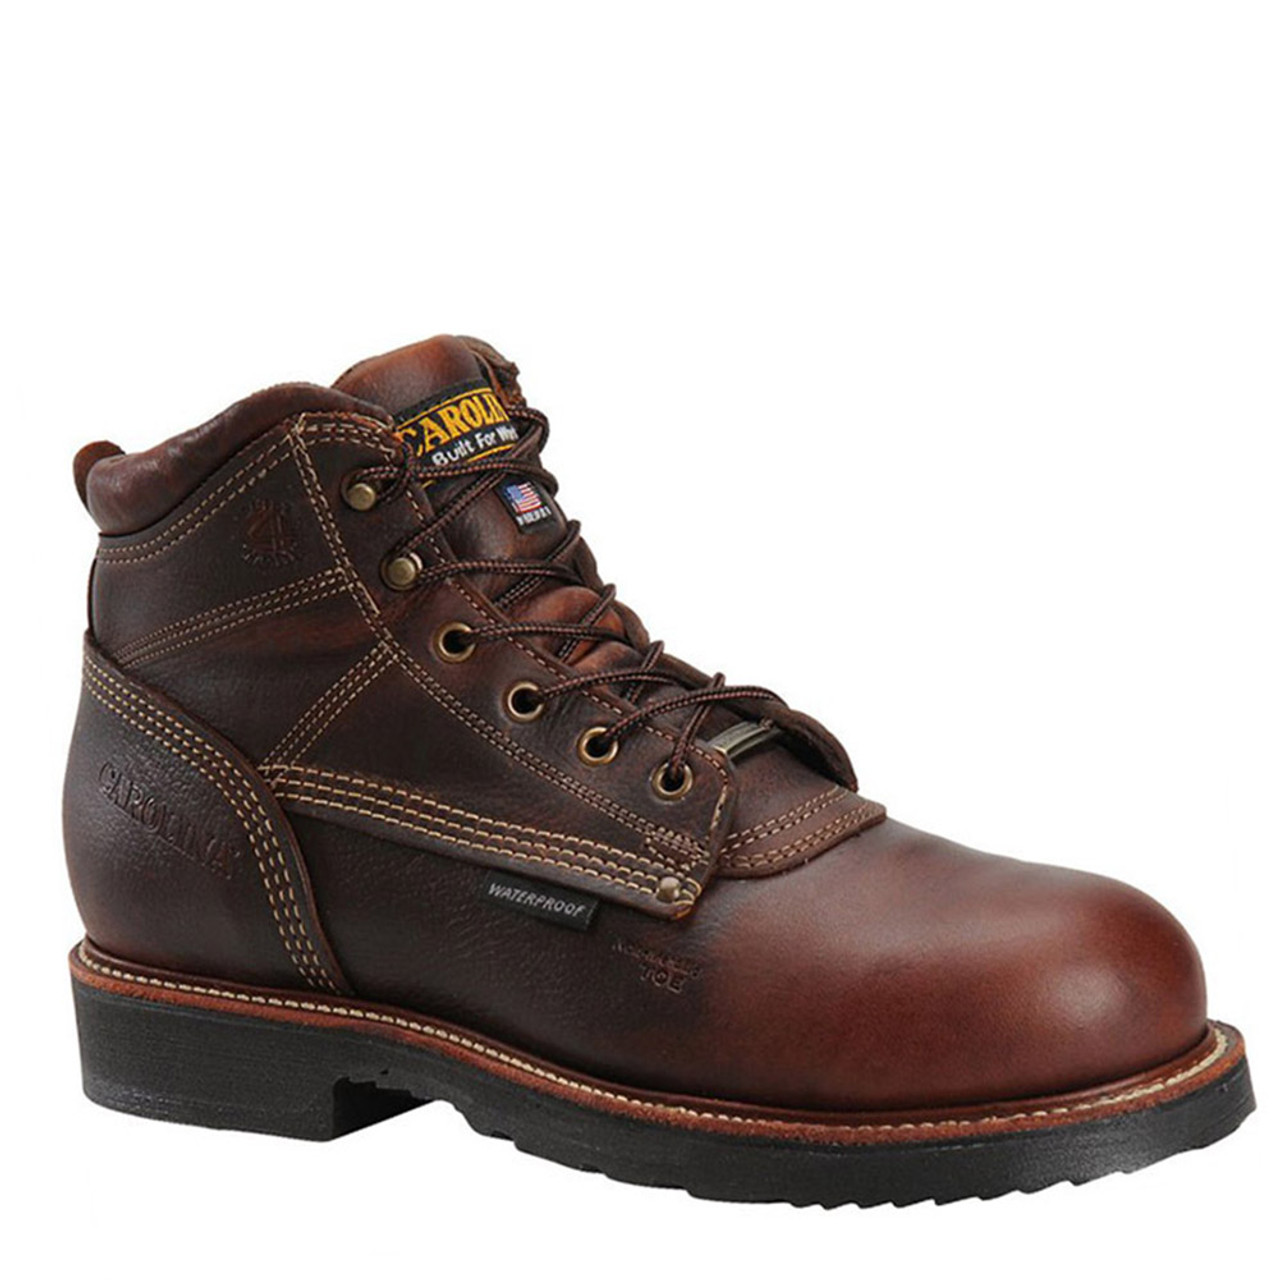 union made work boots